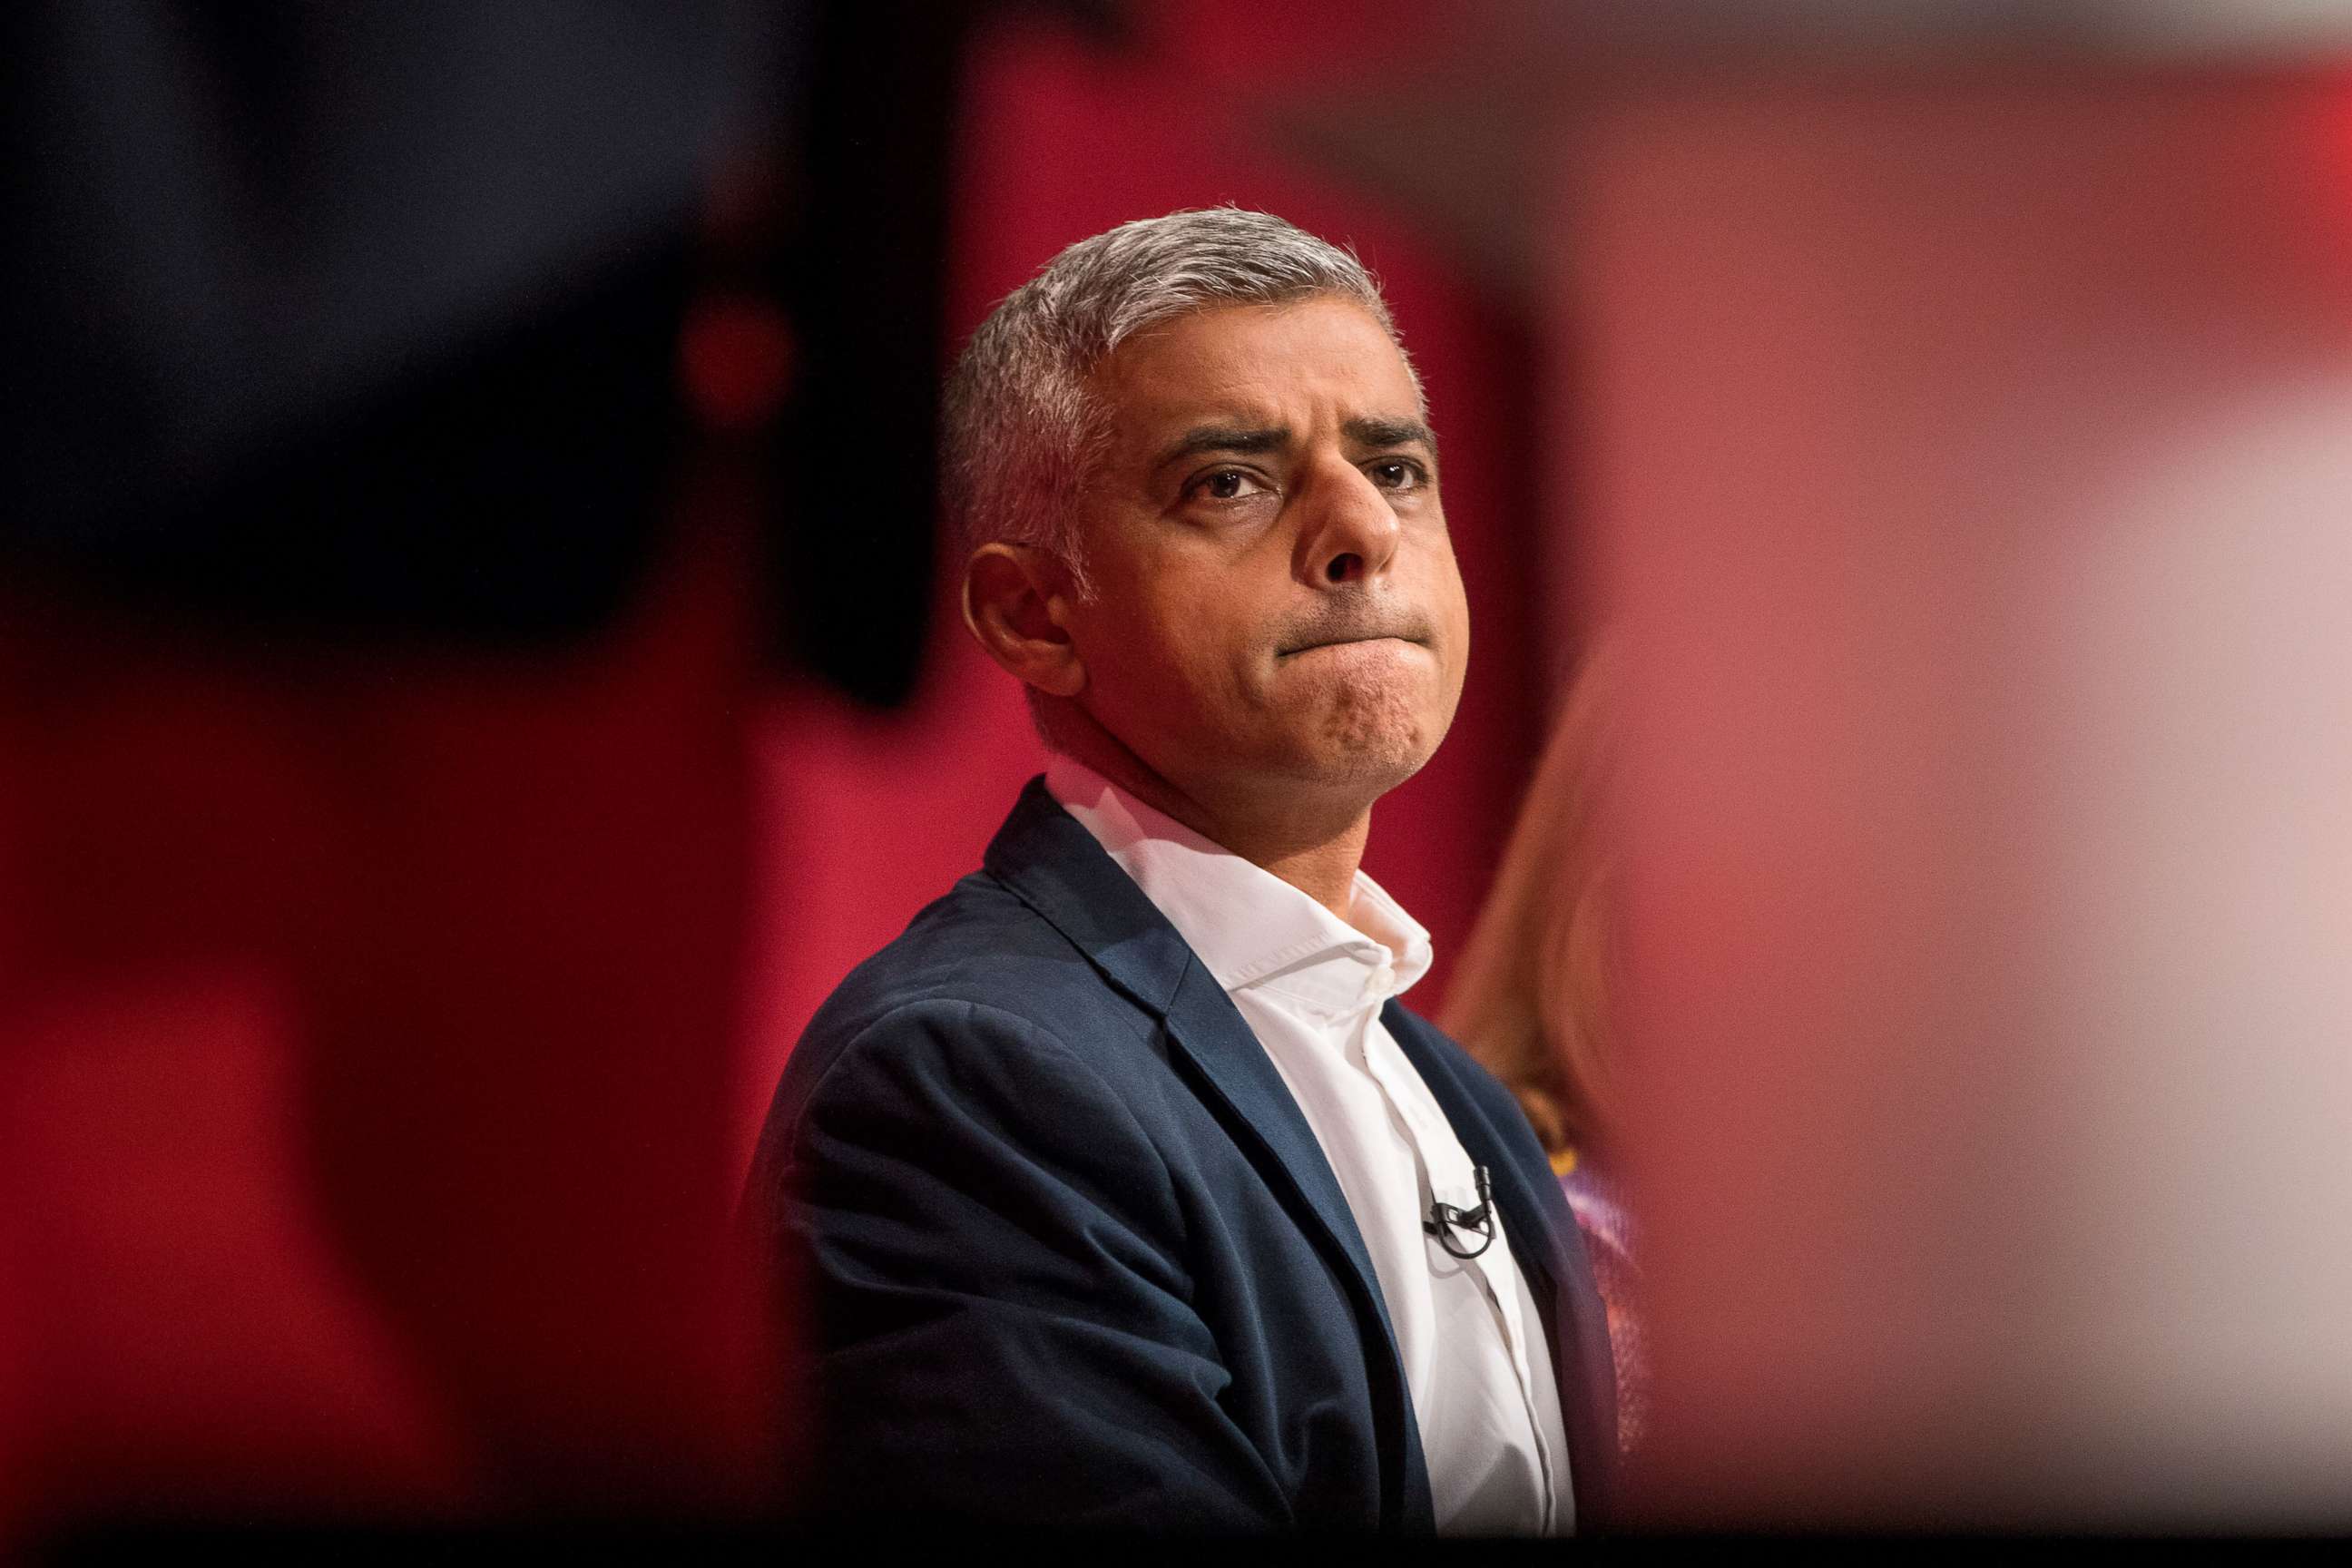 PHOTO: Sadiq Khan, the mayor of London, appears at the Labour Party Annual Conference in Brighton, U.K., on Sept. 25, 2017.